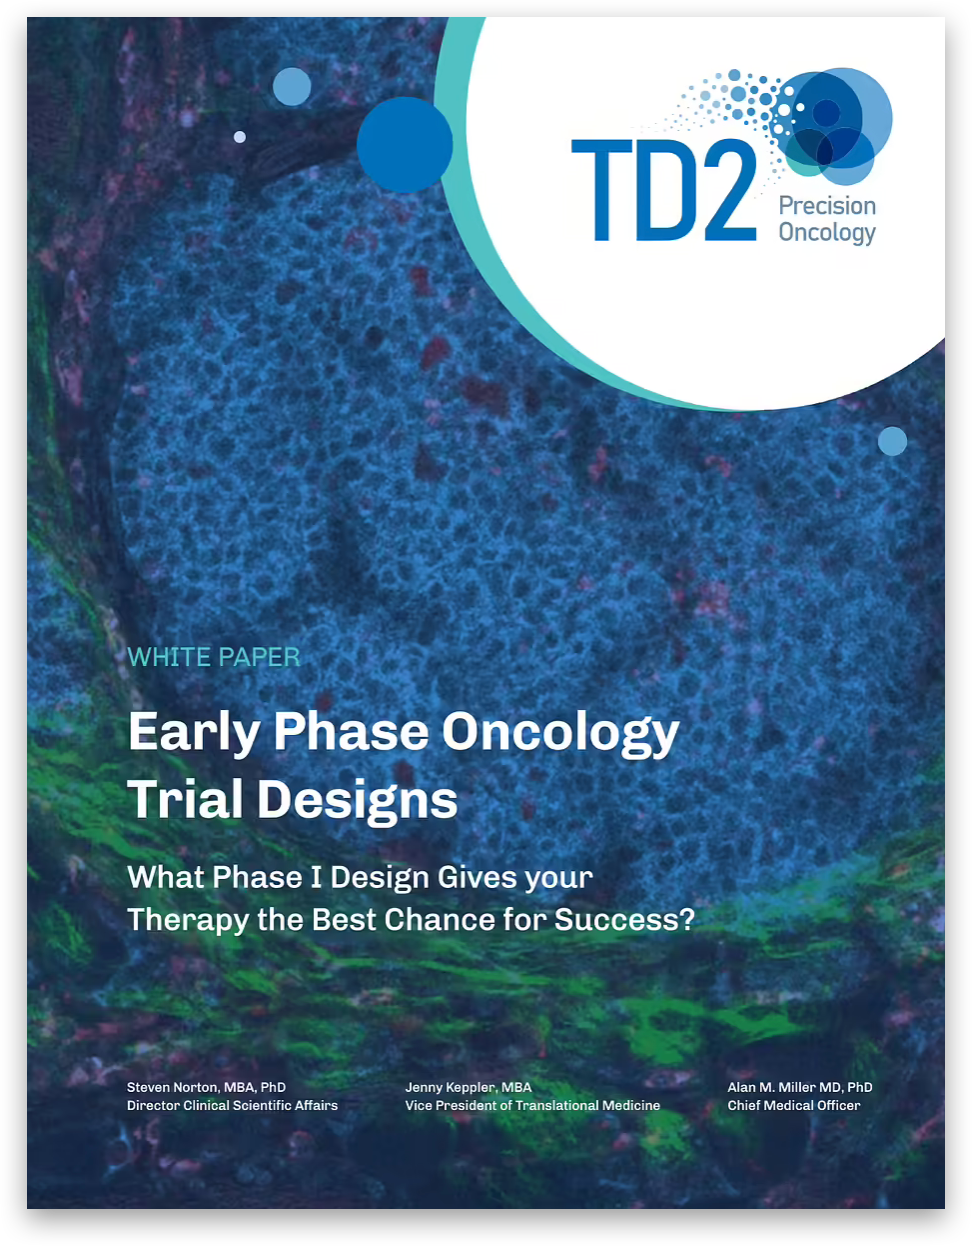 White Paper - Early Phase Oncology Trial Designs
Phase I Strategies Tailored for Success